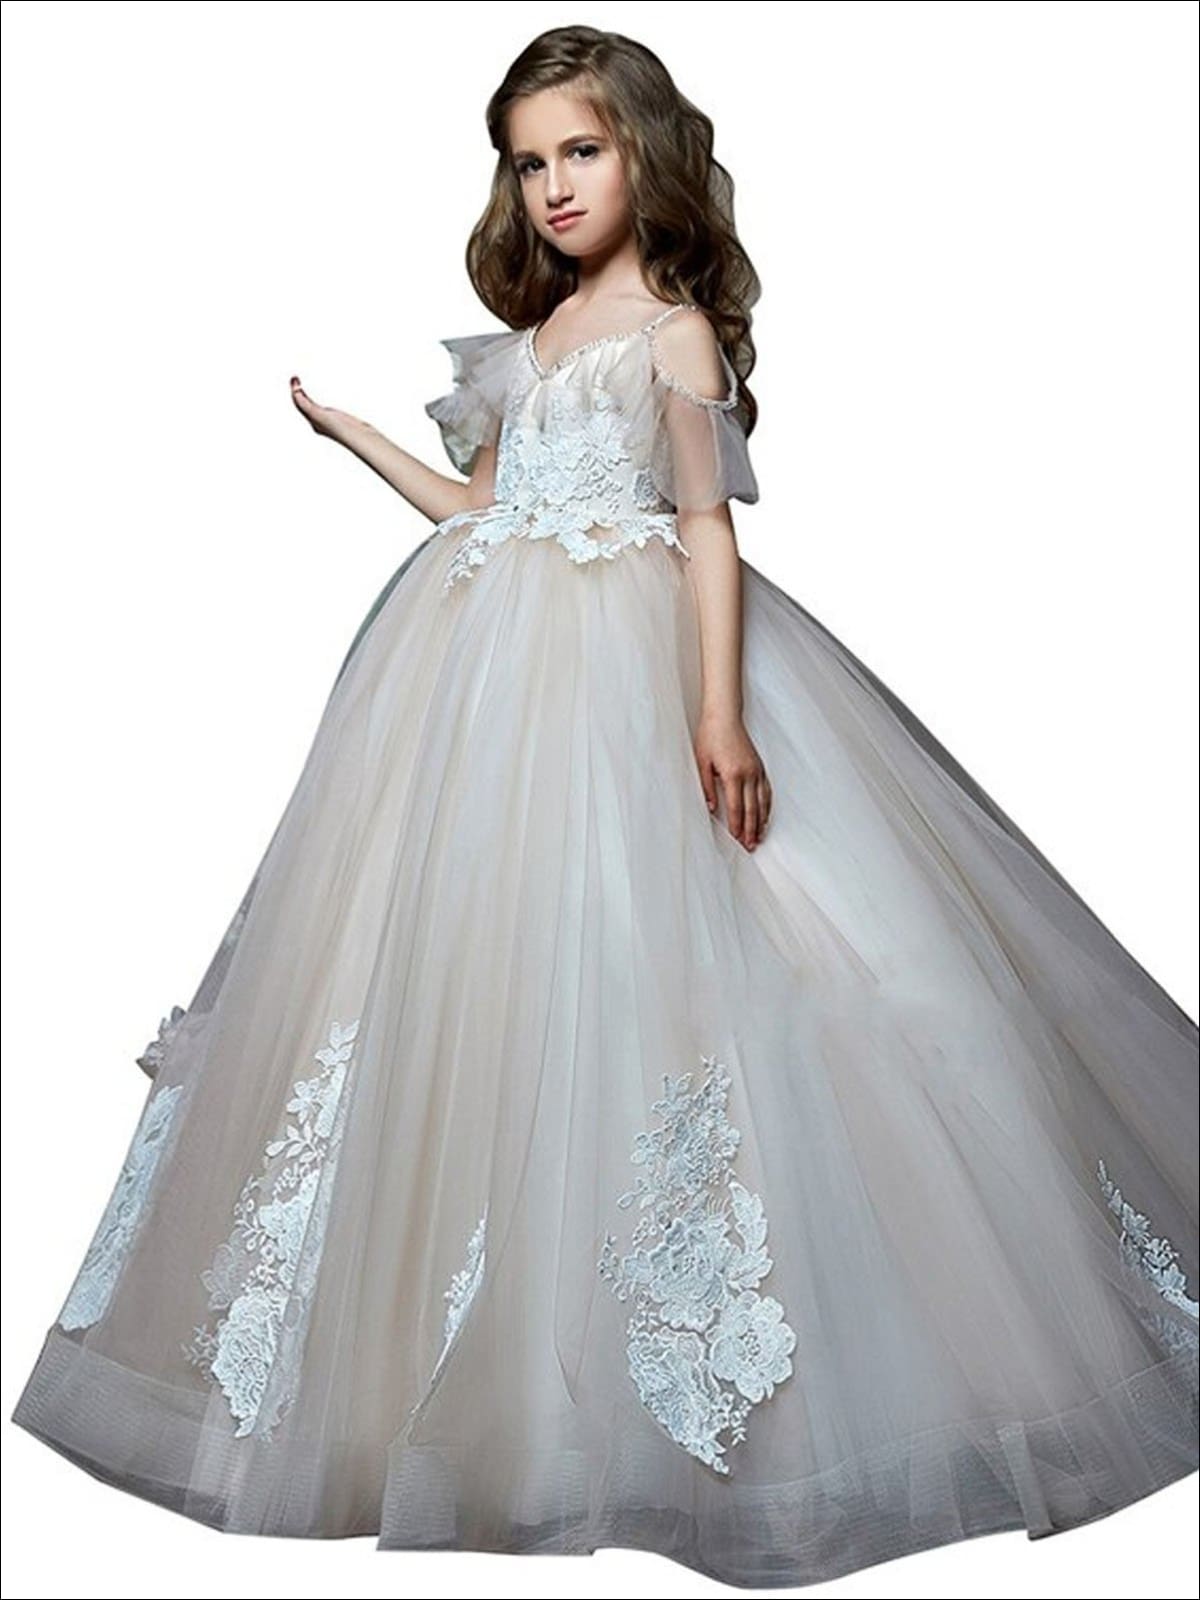 Girls White Cold Shoulder Communion Gown - Champagne / 2T - Girls Gowns